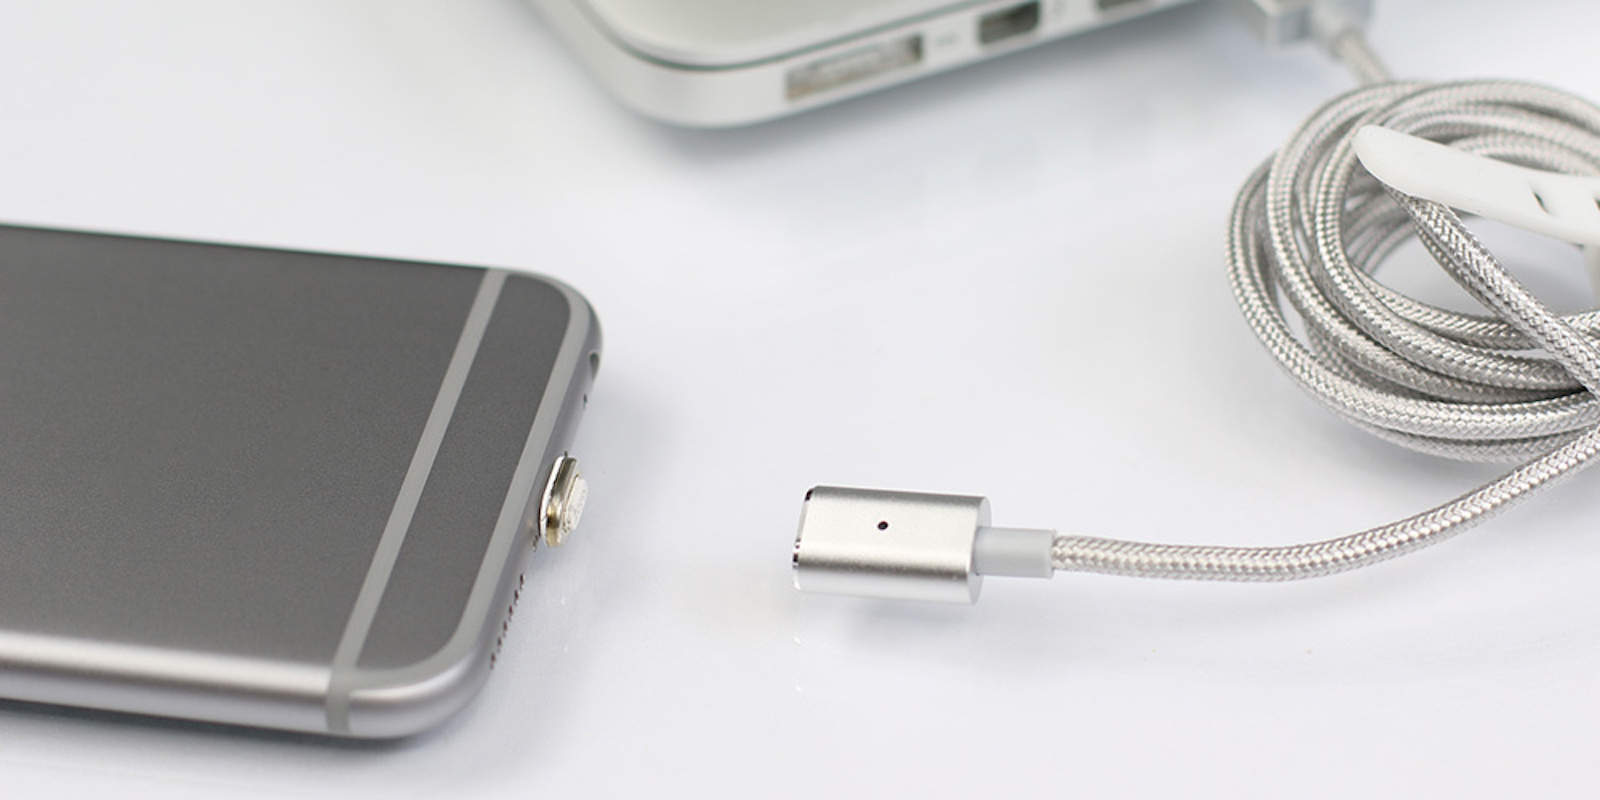 Upgrade To A Magsafe Iphone Connector With This Adapter And Cable